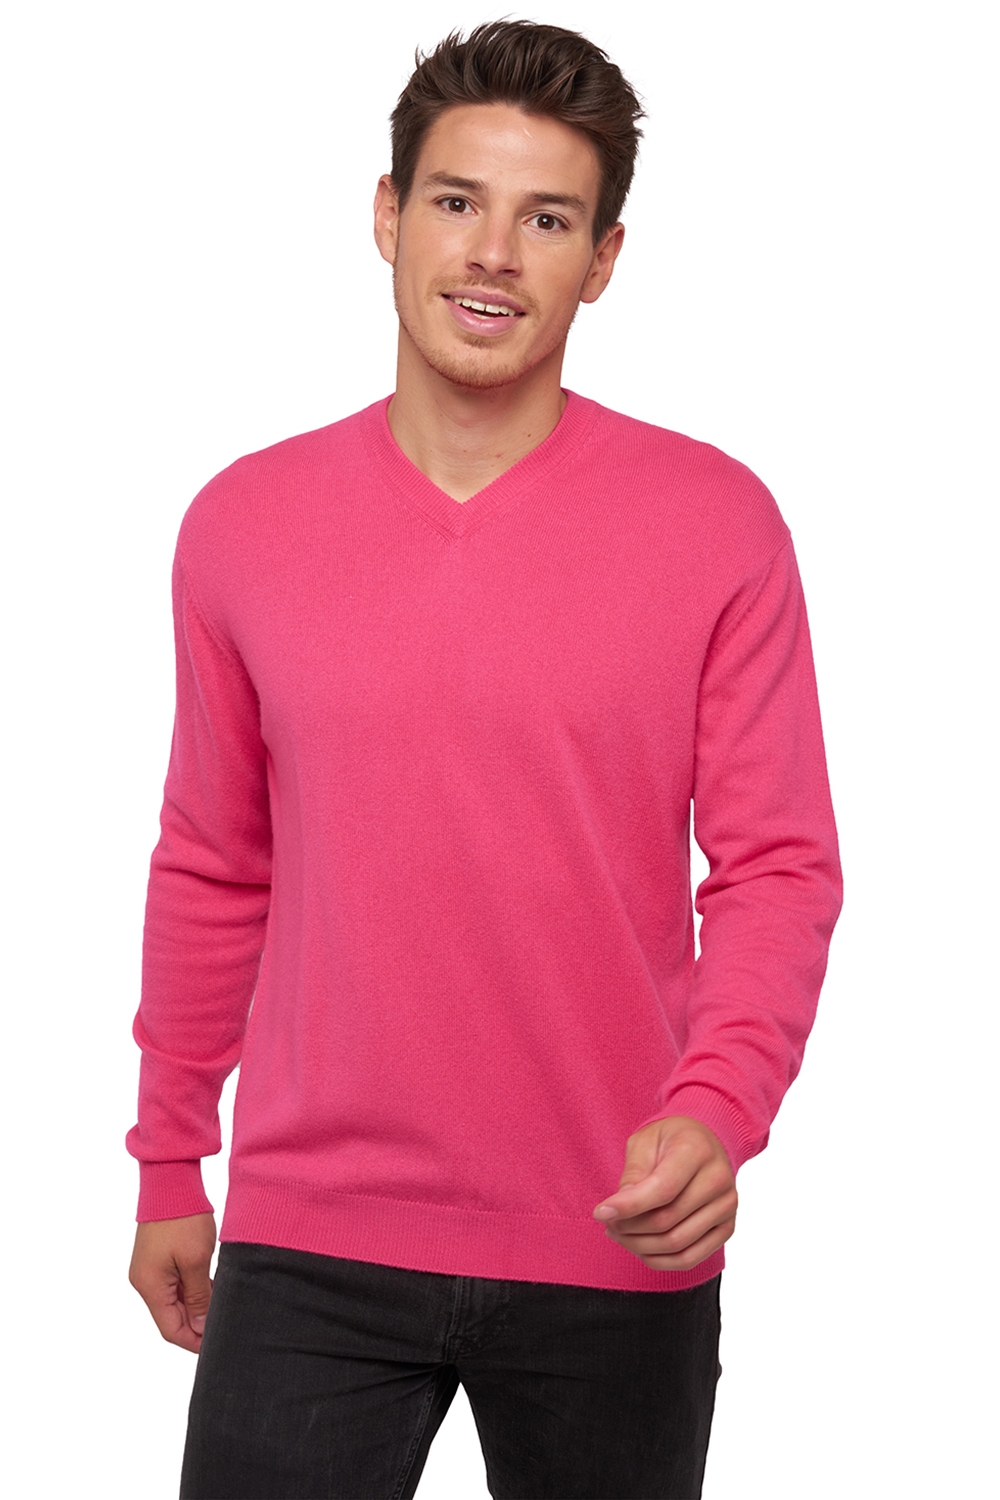 Cachemire pull homme gaspard rose shocking 3xl